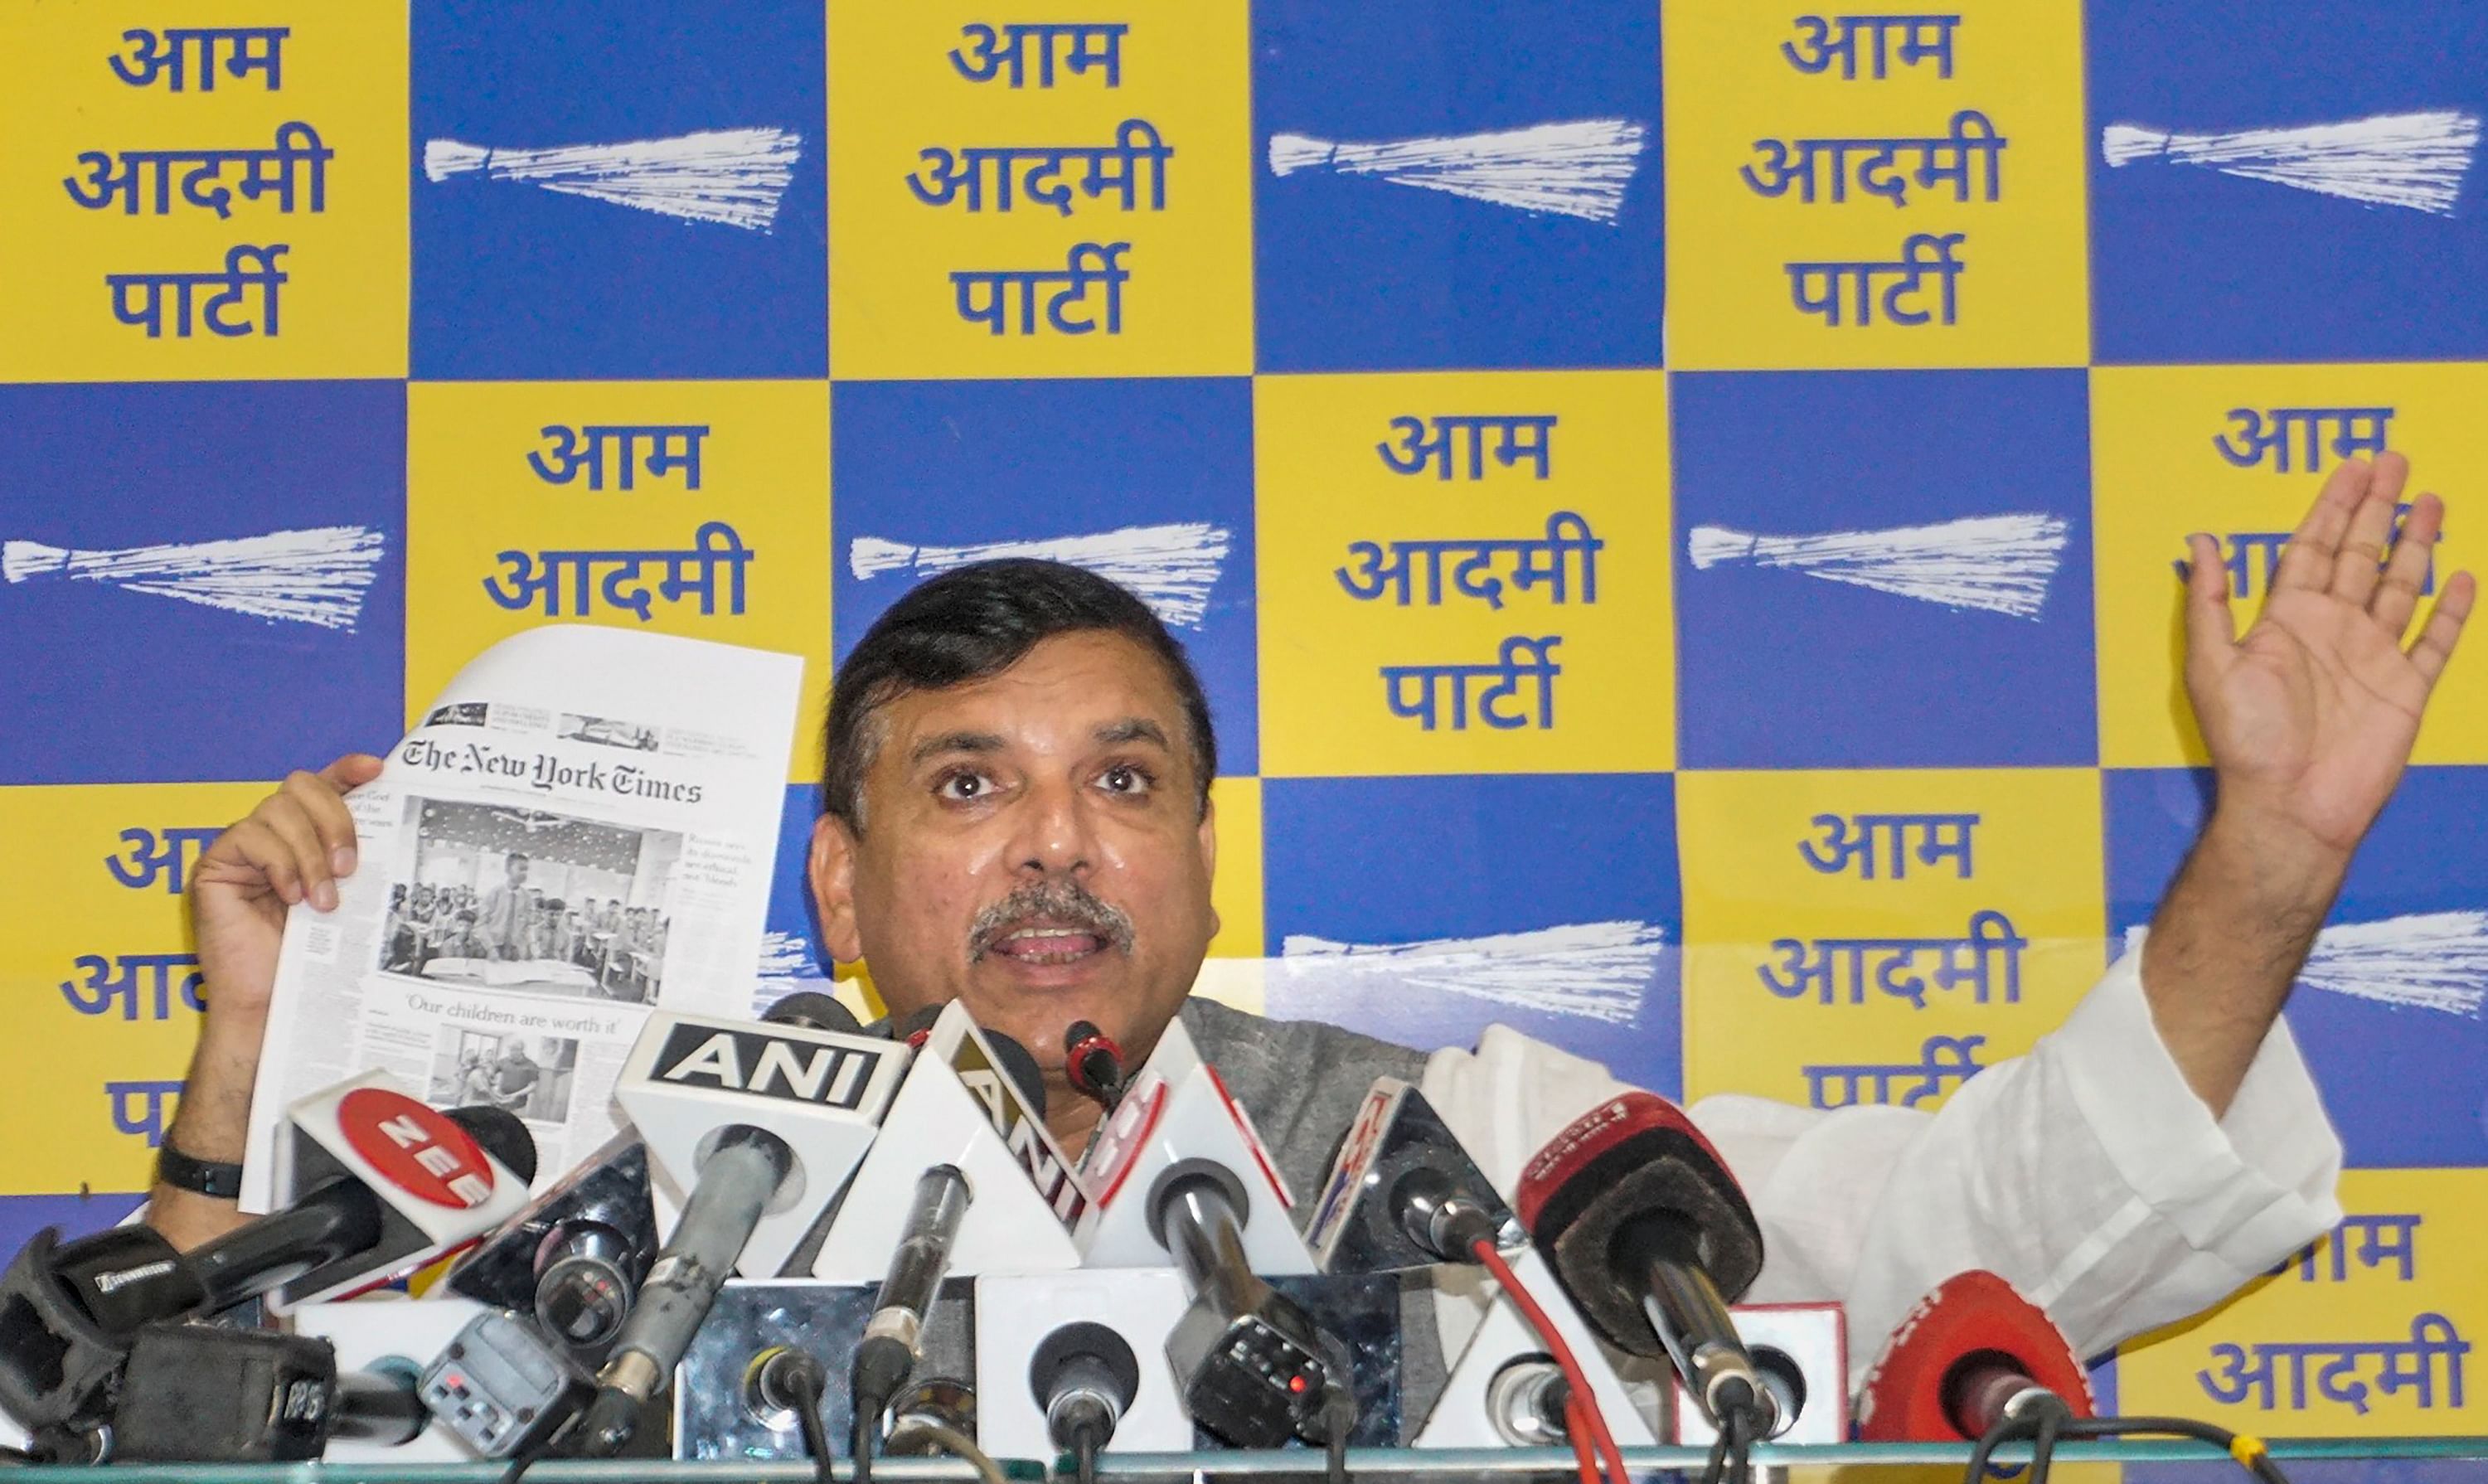 AAP MP Sanjay Singh addresses a press conference after Central Bureau of Investigation (CBI) conducted a raid at the residence of Delhi Deputy Chief Minister Manish Sisodia in connection with alleged irregularities in Delhi Excise Policy. Credit: PTI Photo